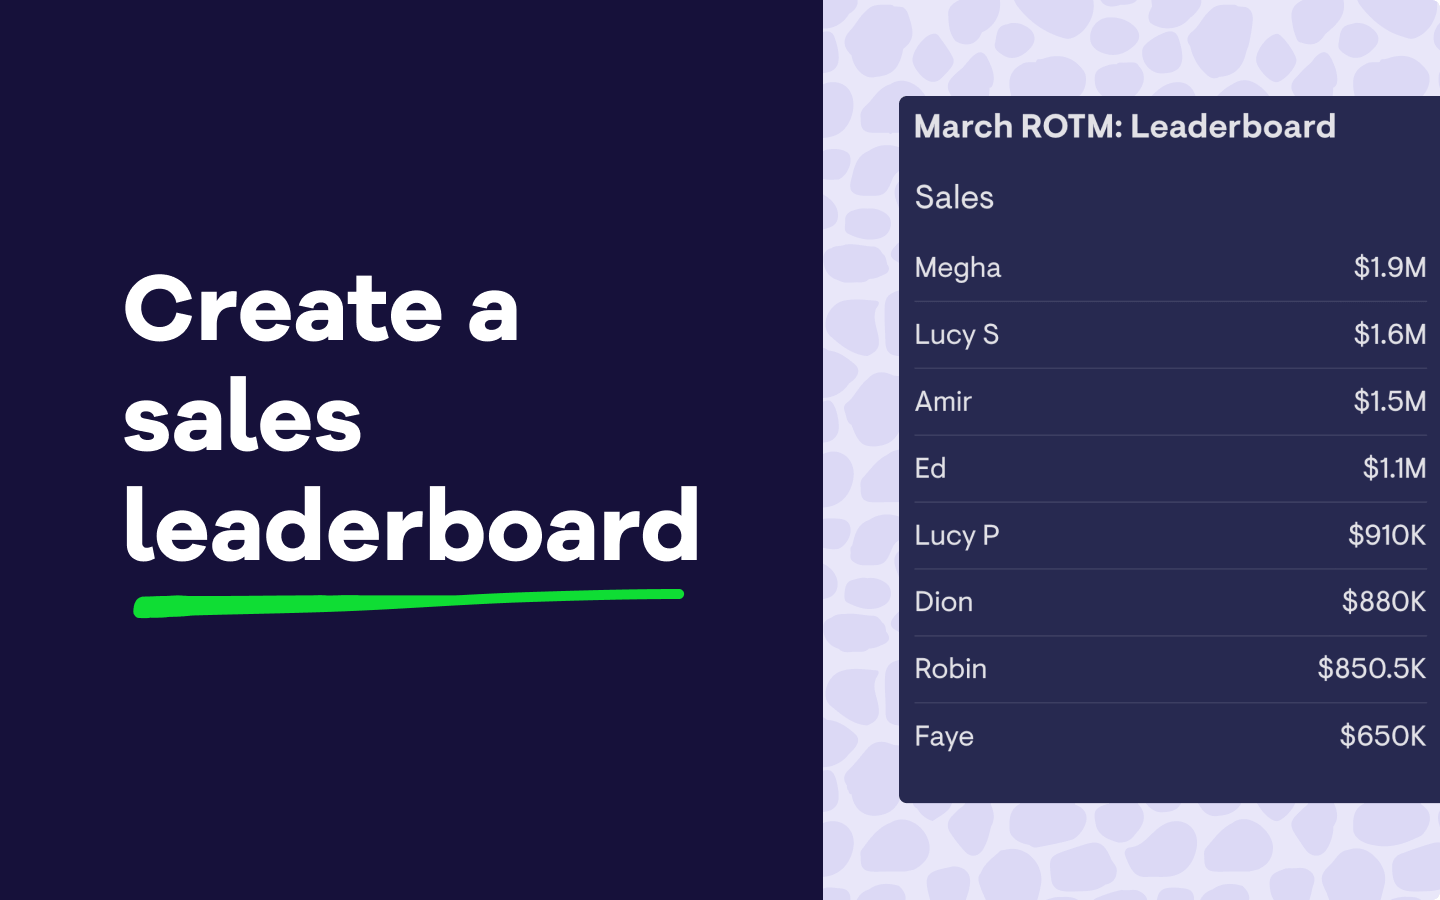 What is a sales leaderboard and how do I create one?